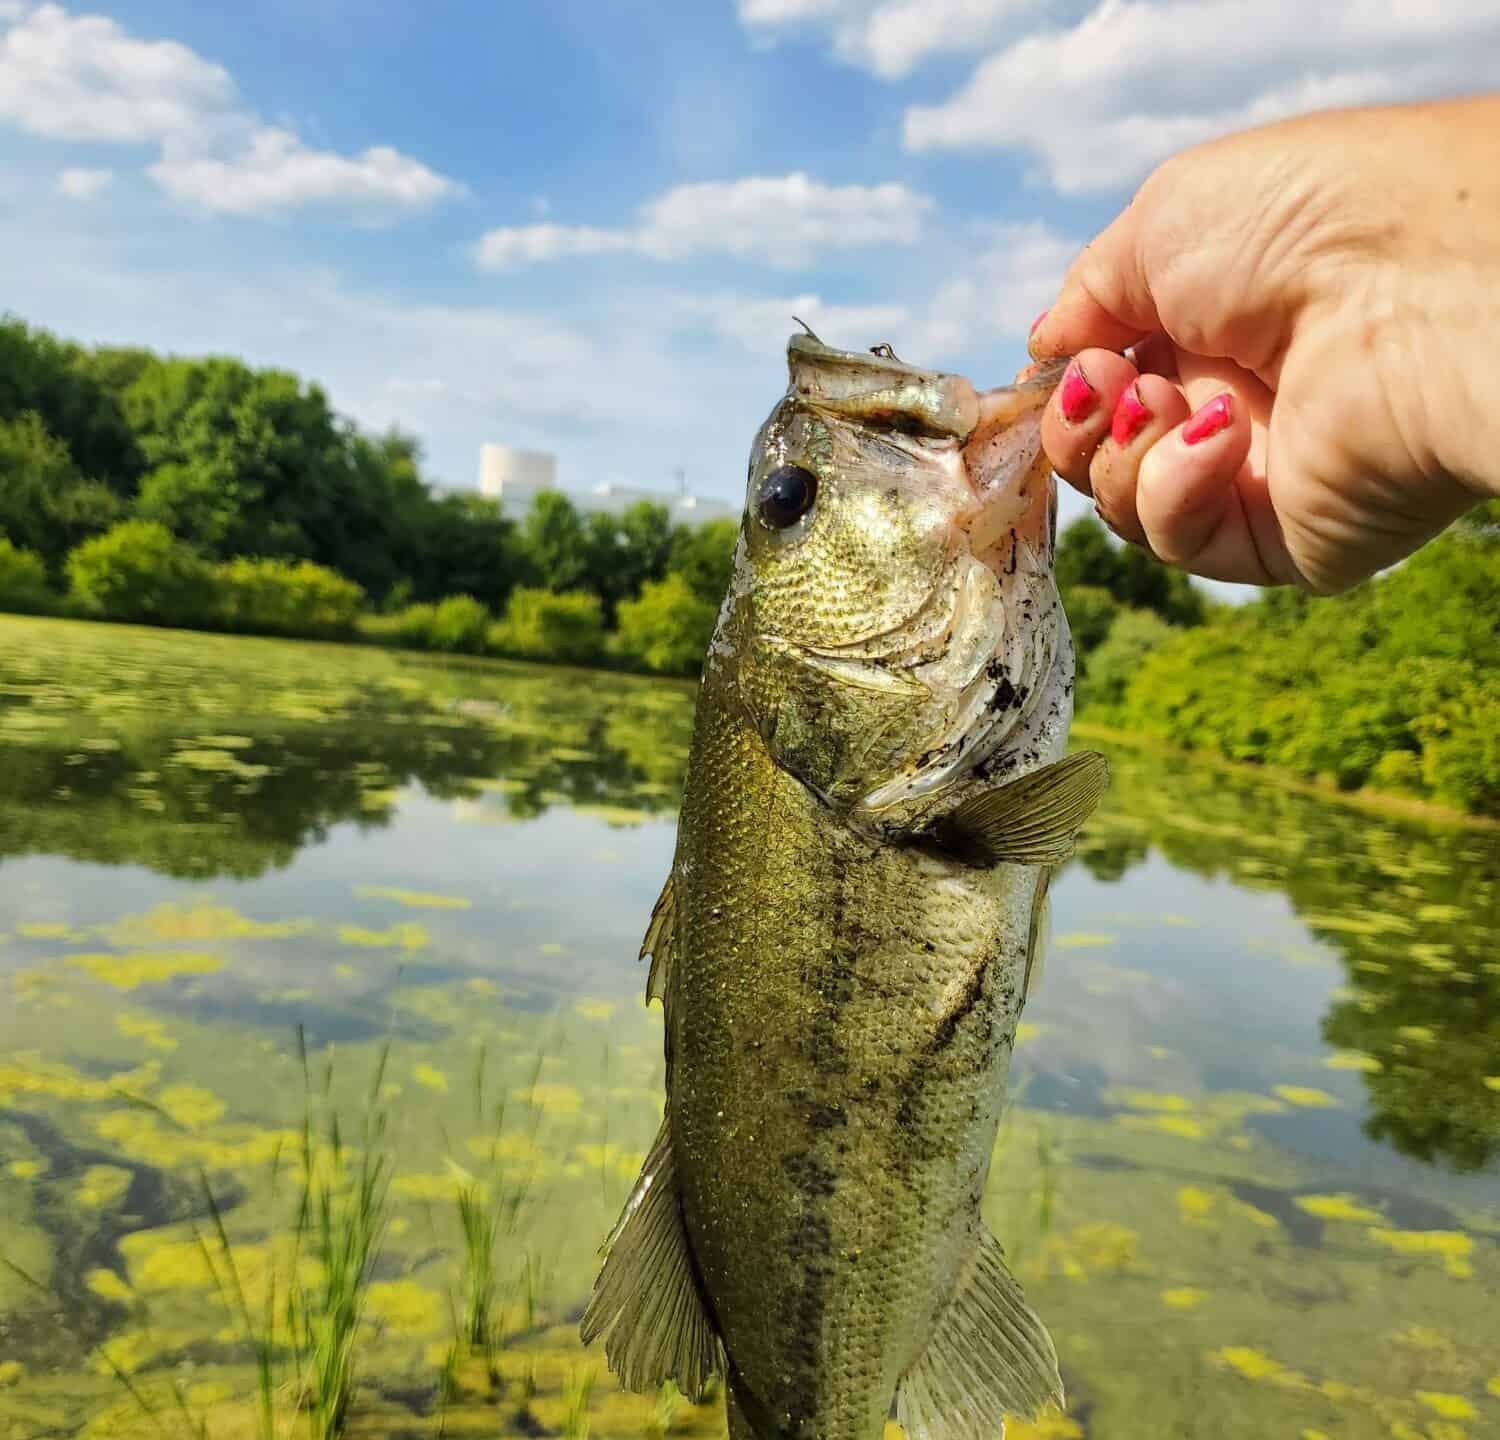 I found a fishing pond with lots of bass in Northern Ohio. The Lilly pads made for a great catch!